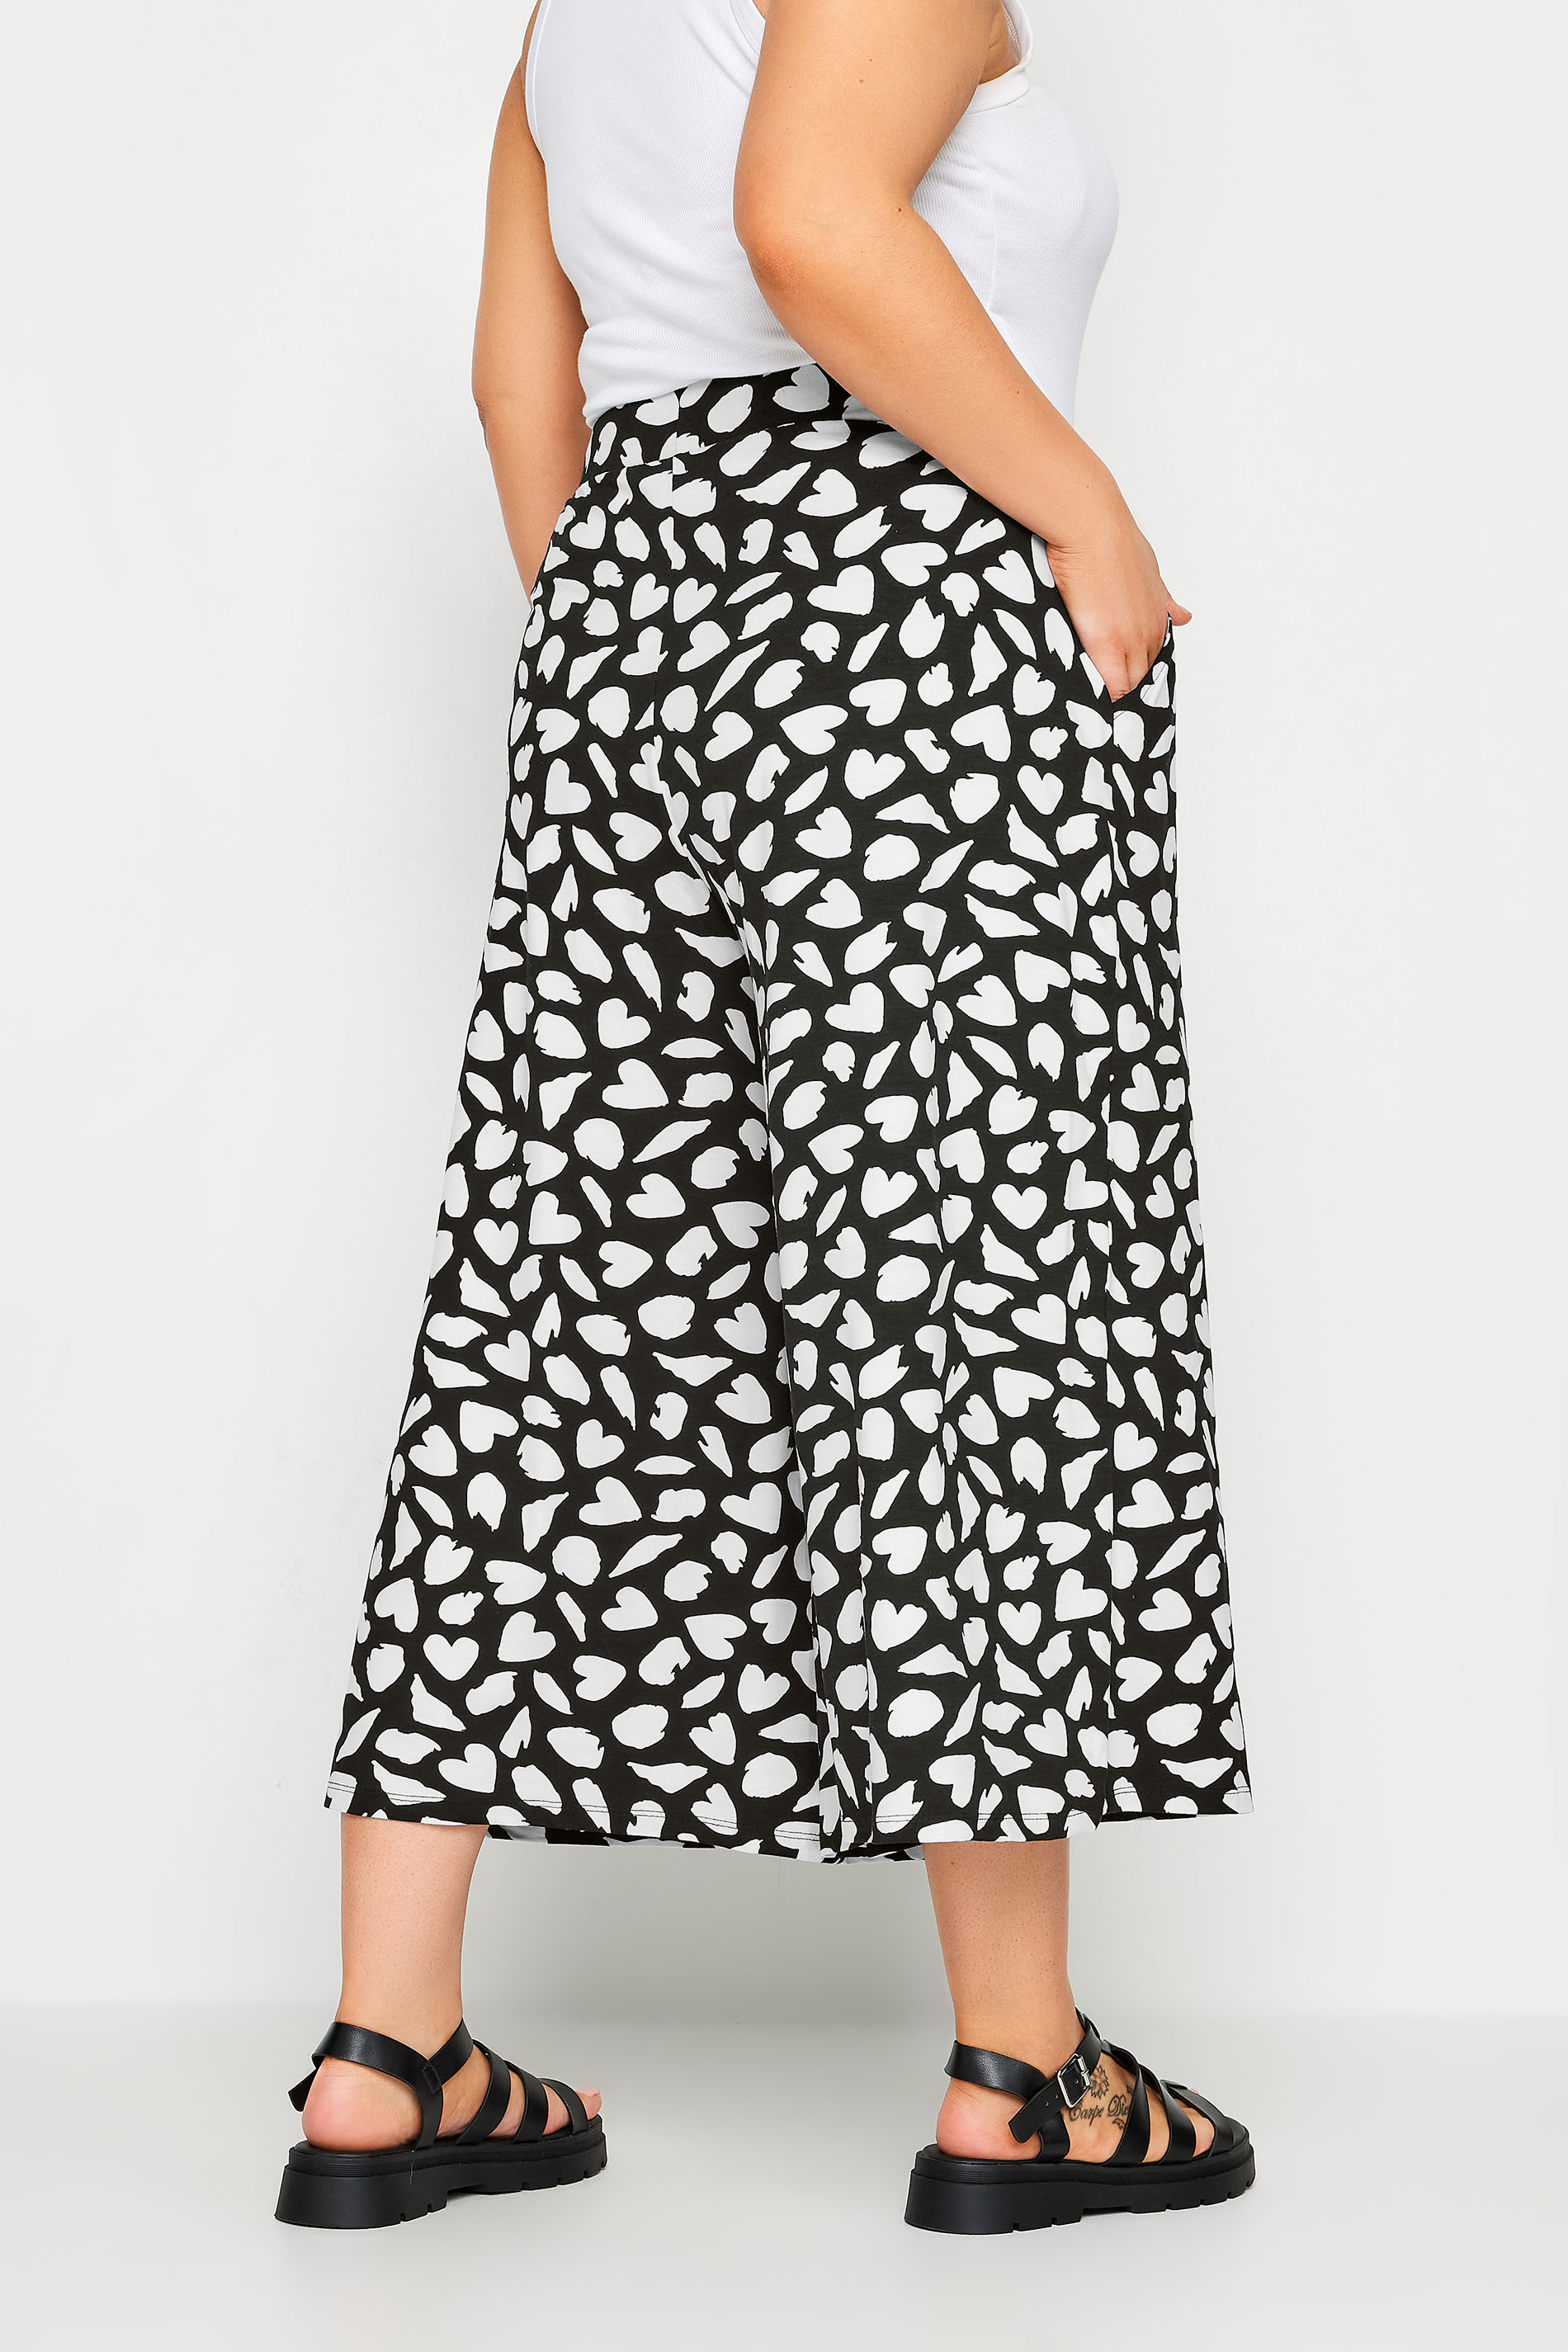 YOURS Plus Size Black & White Heart Print Culottes | Yours Clothing 3